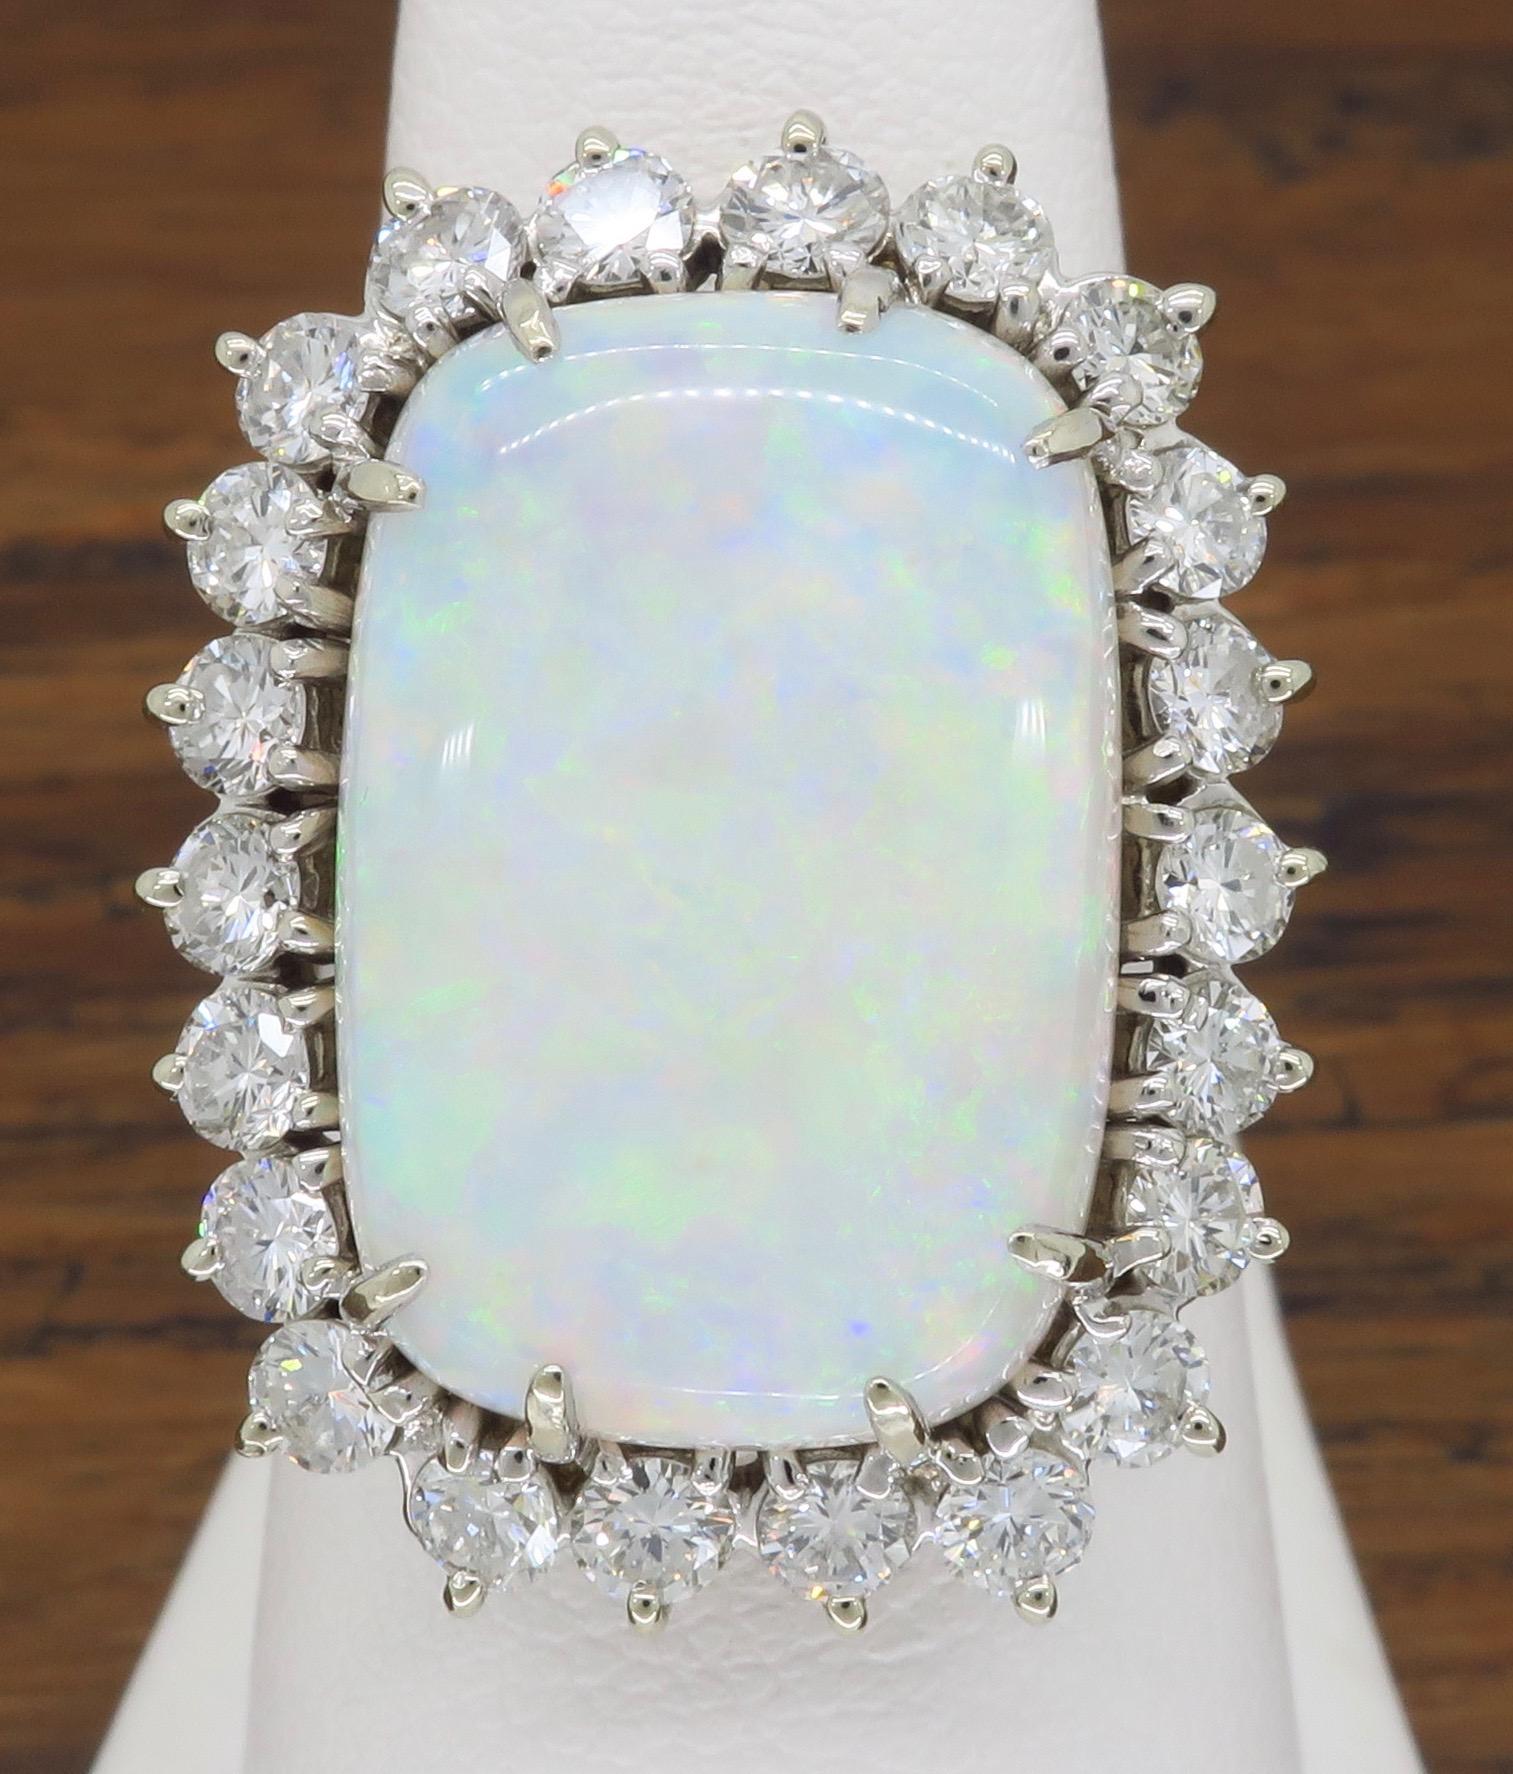 This beautiful opal cocktail ring shows a vivid play of iridescent colors surrounded by 22 Round Brilliant Cut Diamonds. 

Gemstone: Opal & Diamond
Gemstone Carat Weight: Approximately 19x13.2mm Opal
Diamond Carat Weight: Approximately